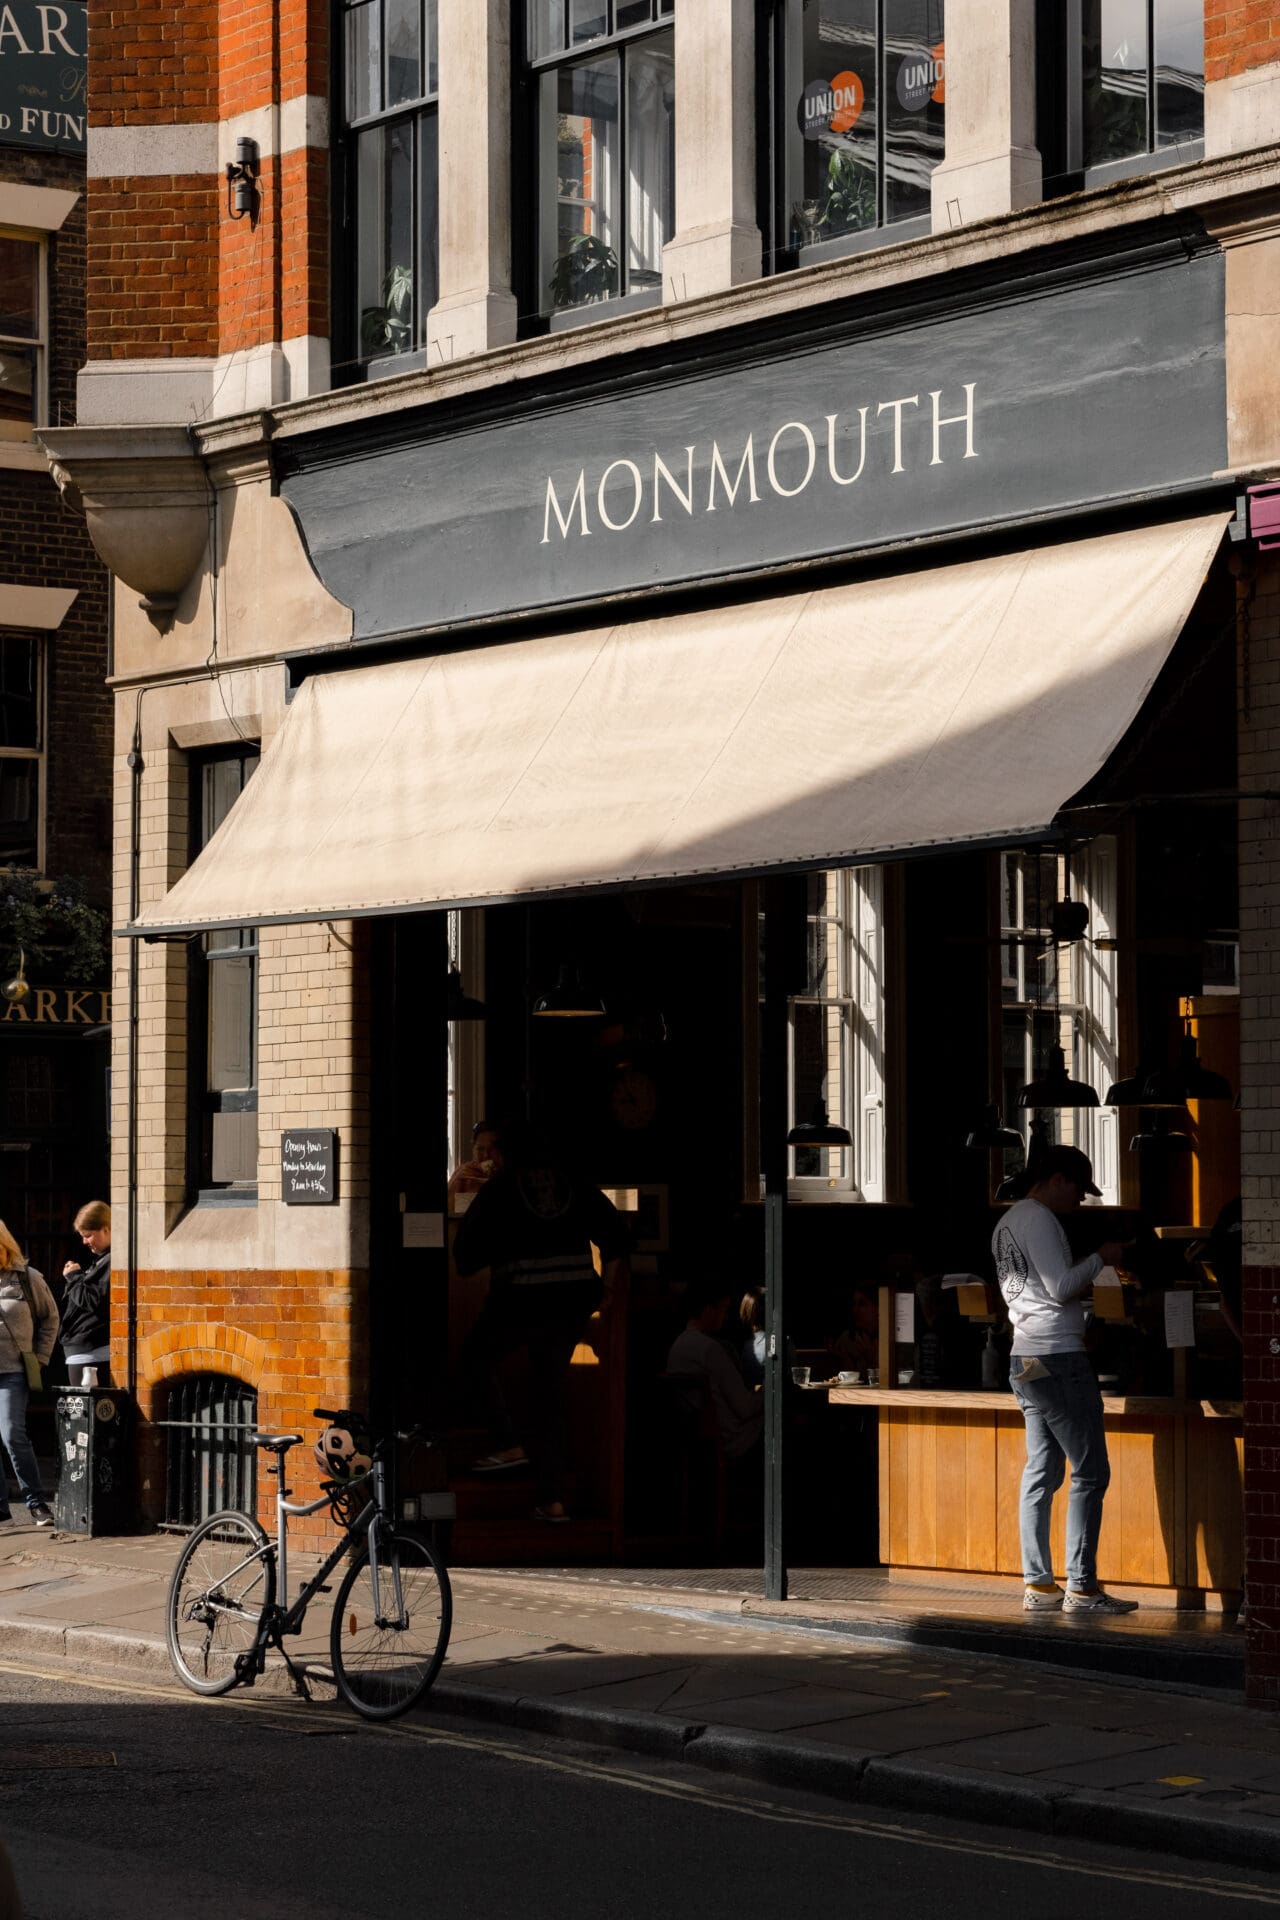 The best coffee shops in London | The exterior of Monmouth Coffee Shop